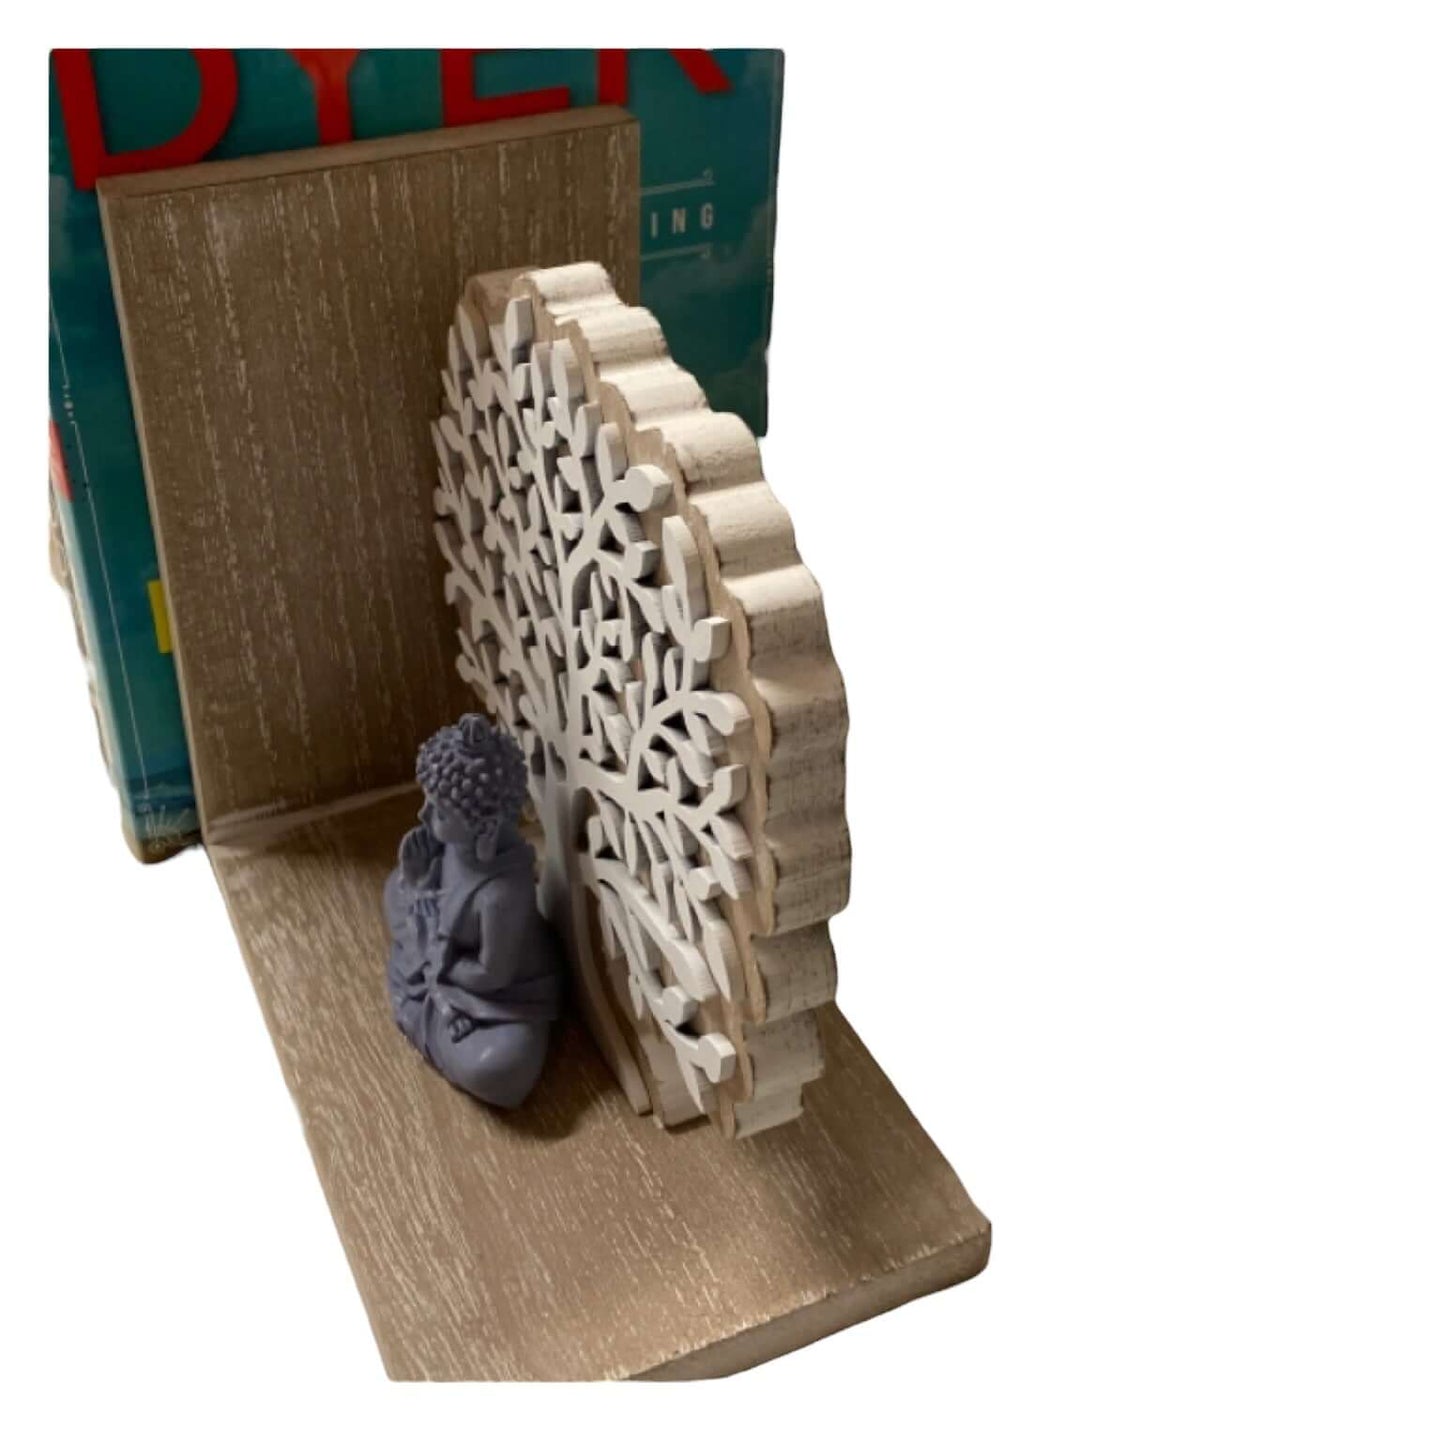 Book Ends Bookend Buddha Tree of Life - The Renmy Store Homewares & Gifts 